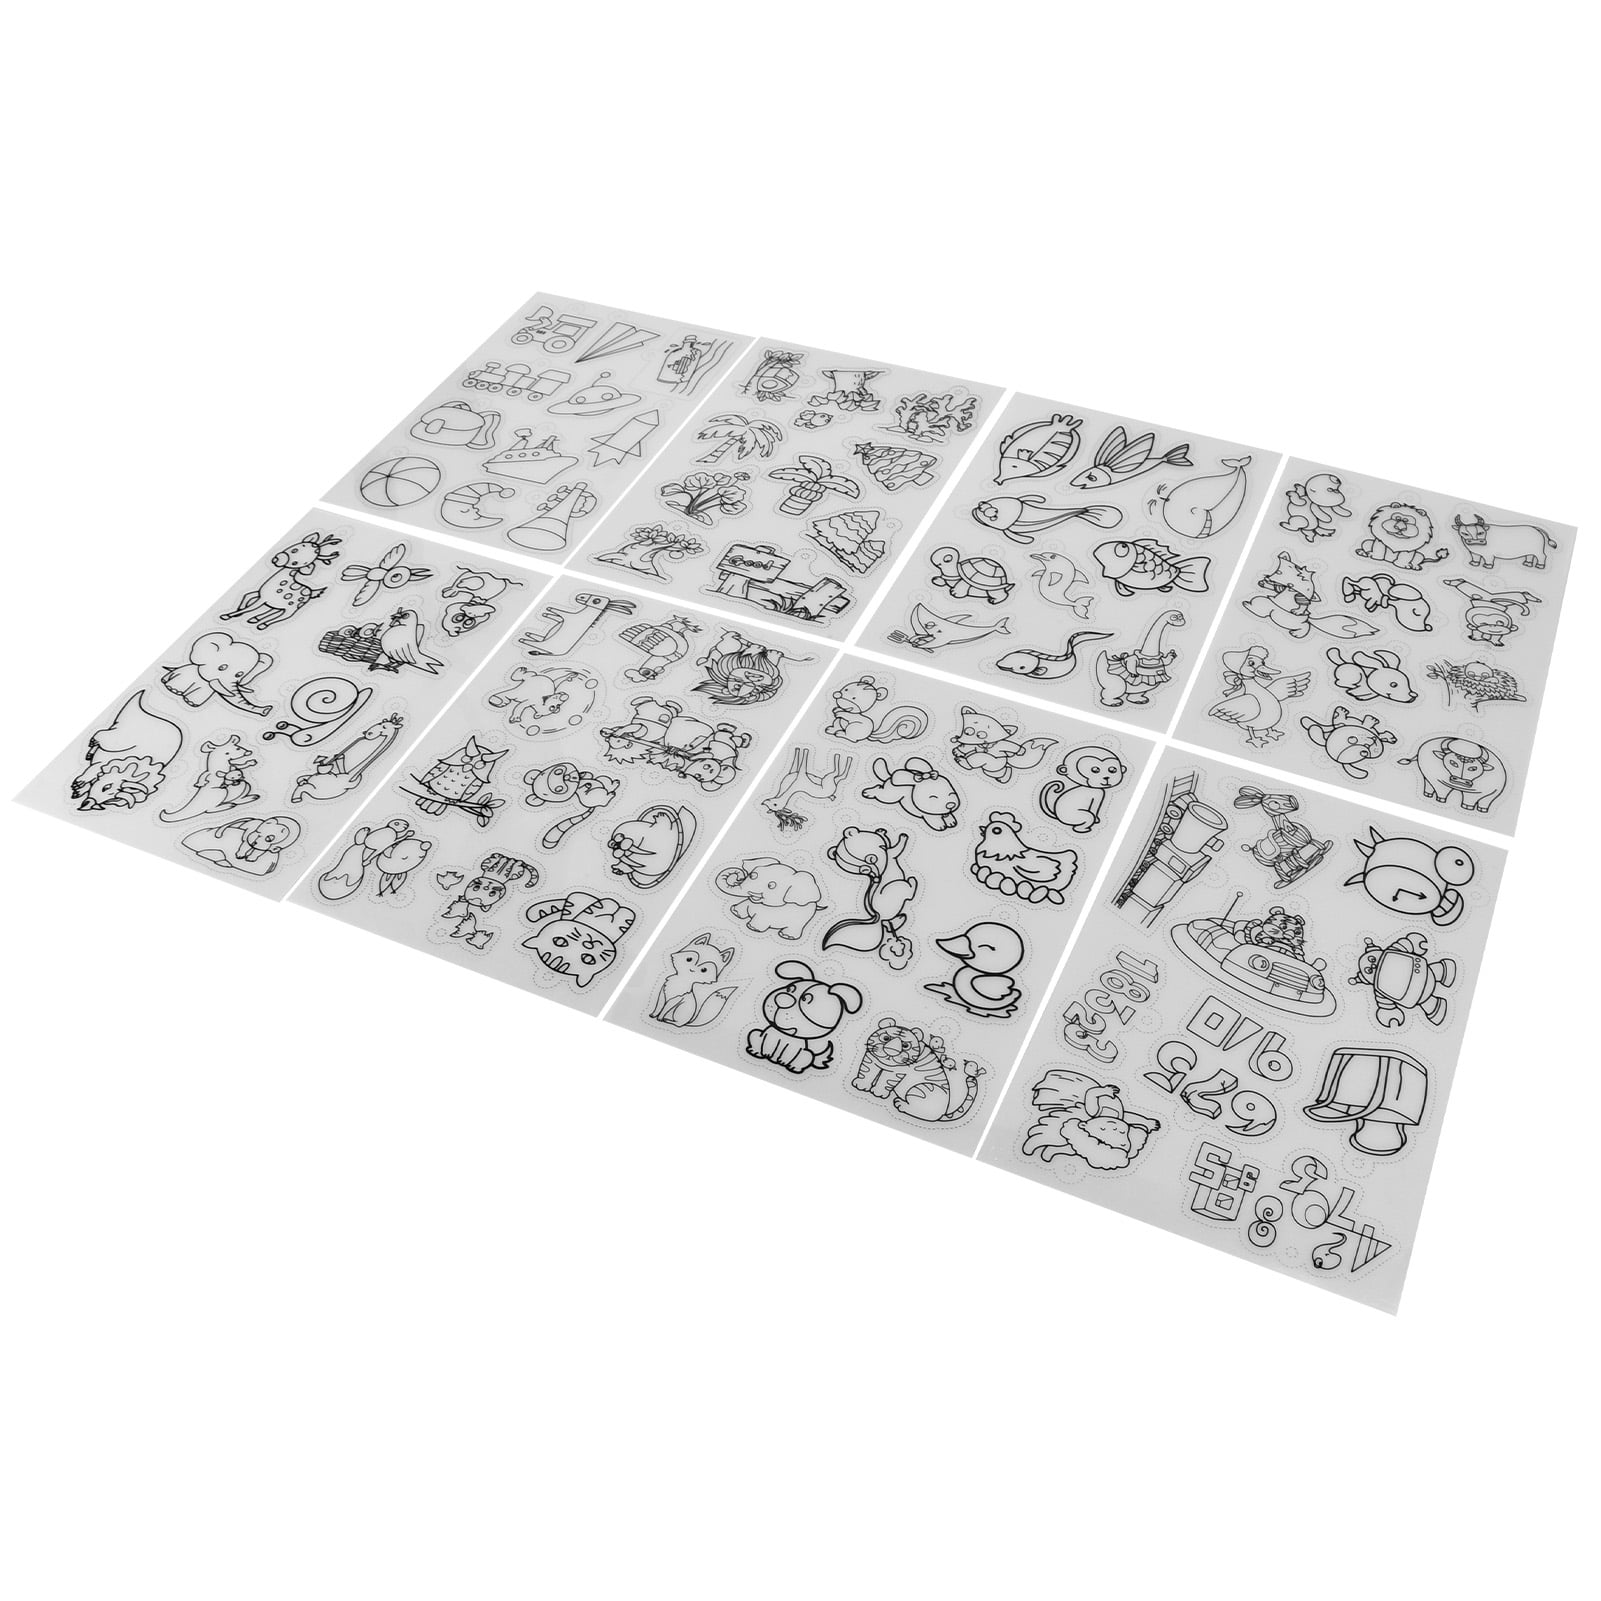 12pcs Shrinky Dink Papers, Heat Shrink Sheet Cartoon Christmas Series  Patterns Heat Shrinky Paper for DIY Keychain Pendant, Earrings and Other  Craft